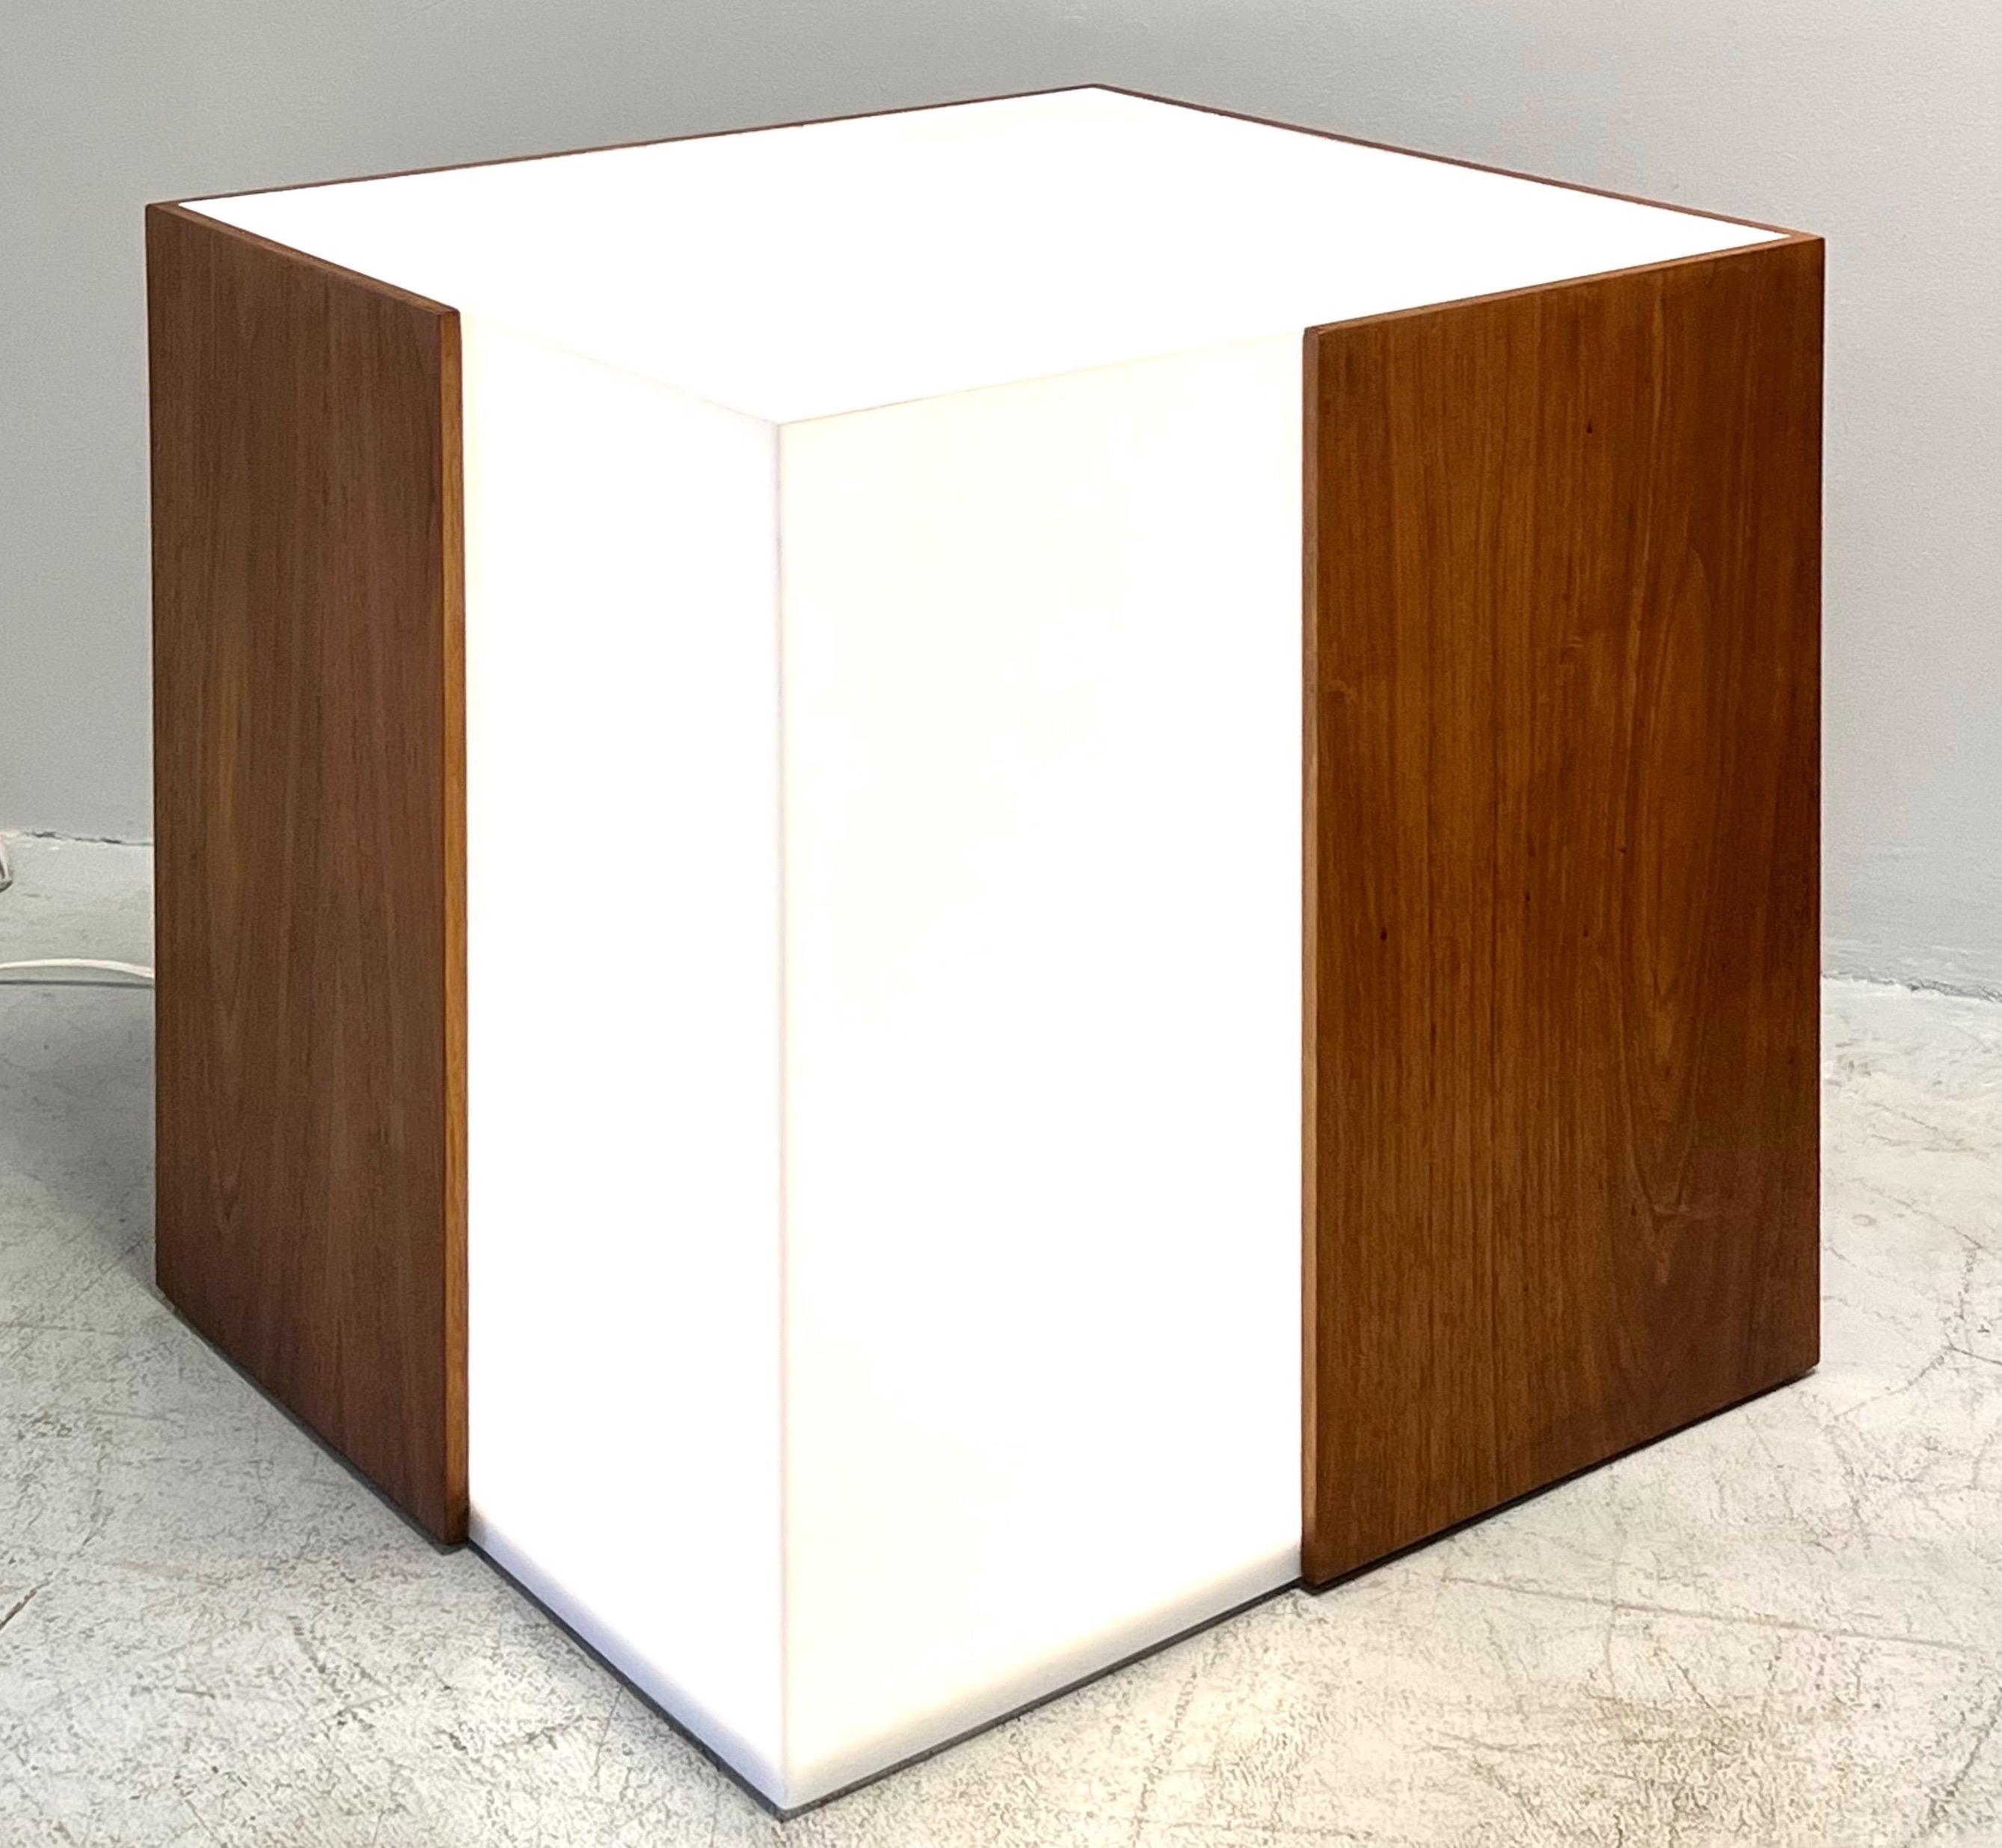 A Vladimir Kagan illuminated cube table. Walnut and white acrylic. Perfect for home or gallery application.